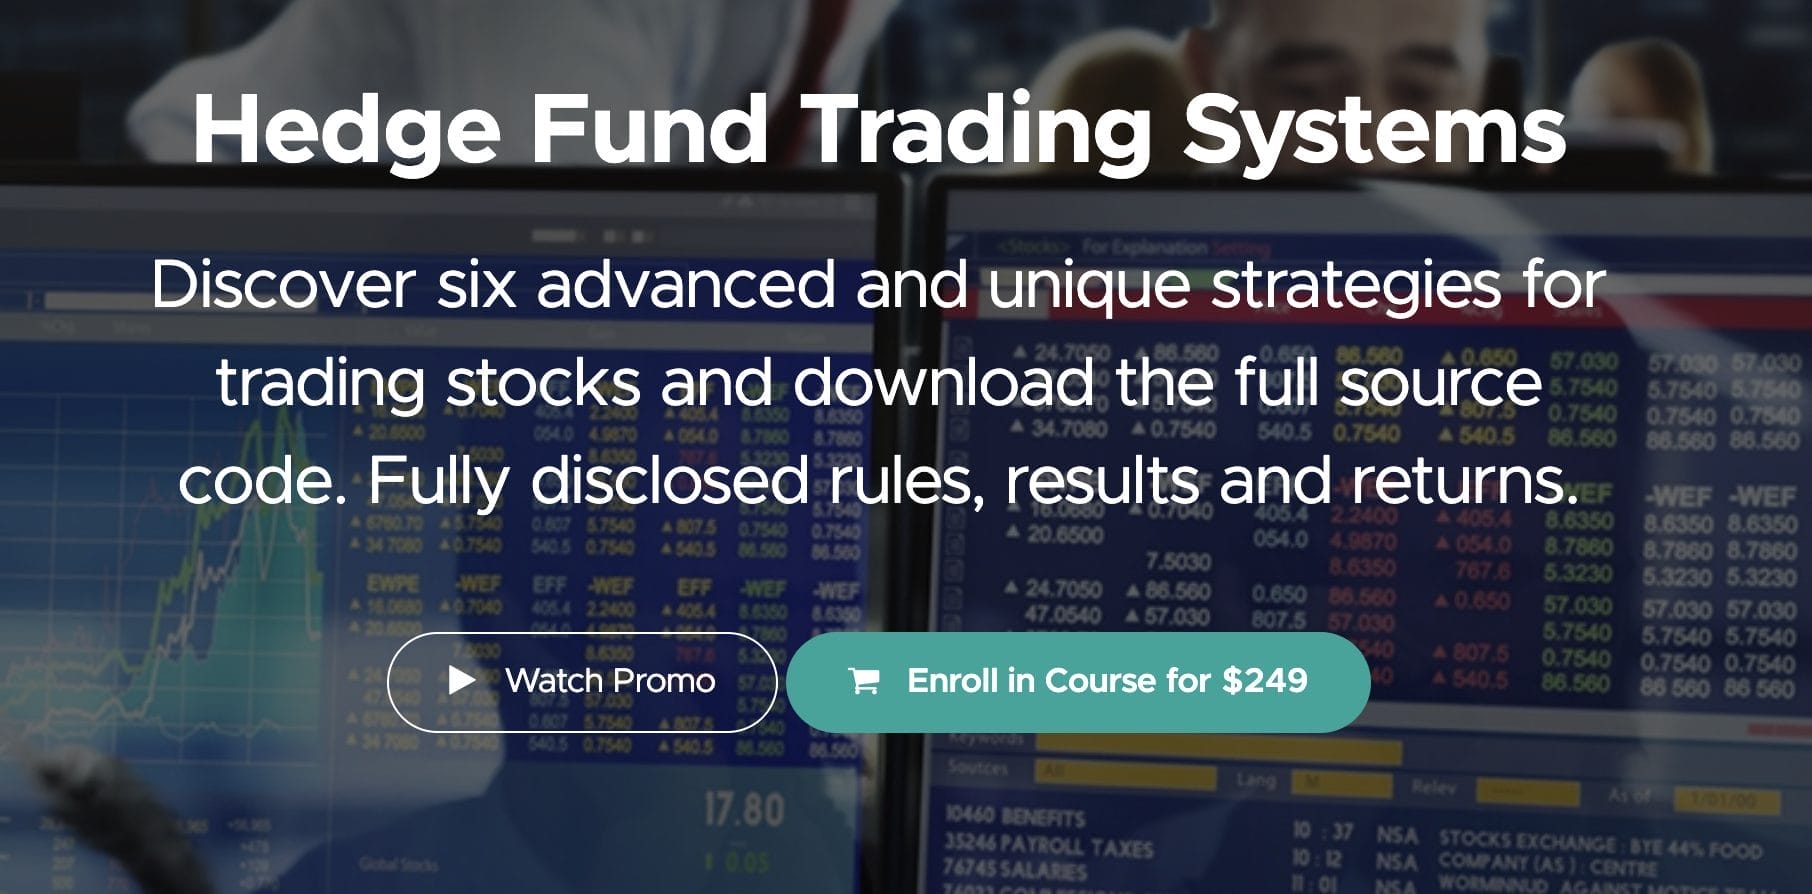 Hedge Fund Trading Systems